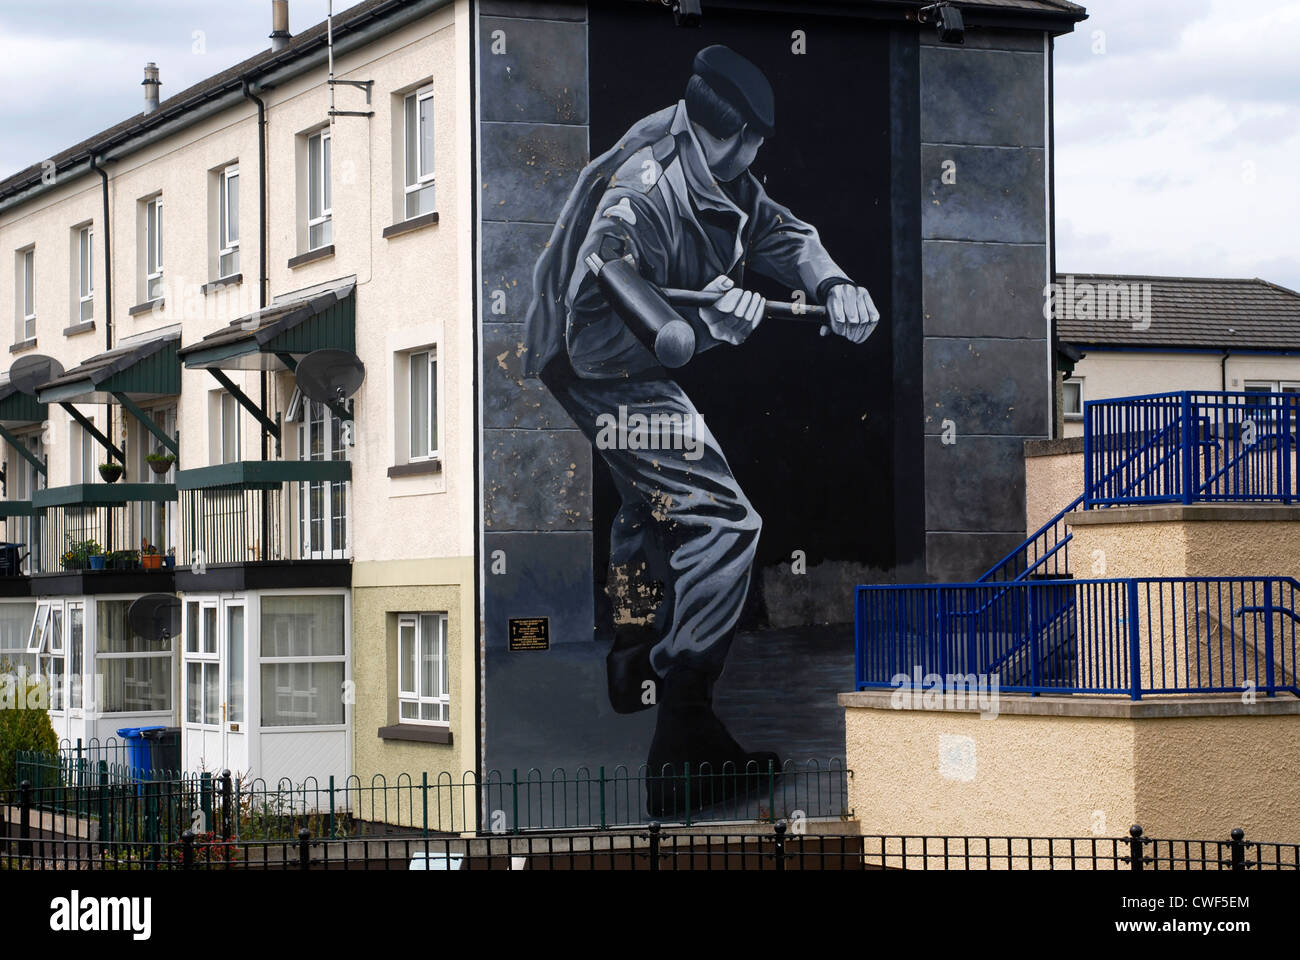 Political Mural in The Bogside, Derry, Londonderry, County Derry, Ulster, North Ireland, UK, Europe. Stock Photo